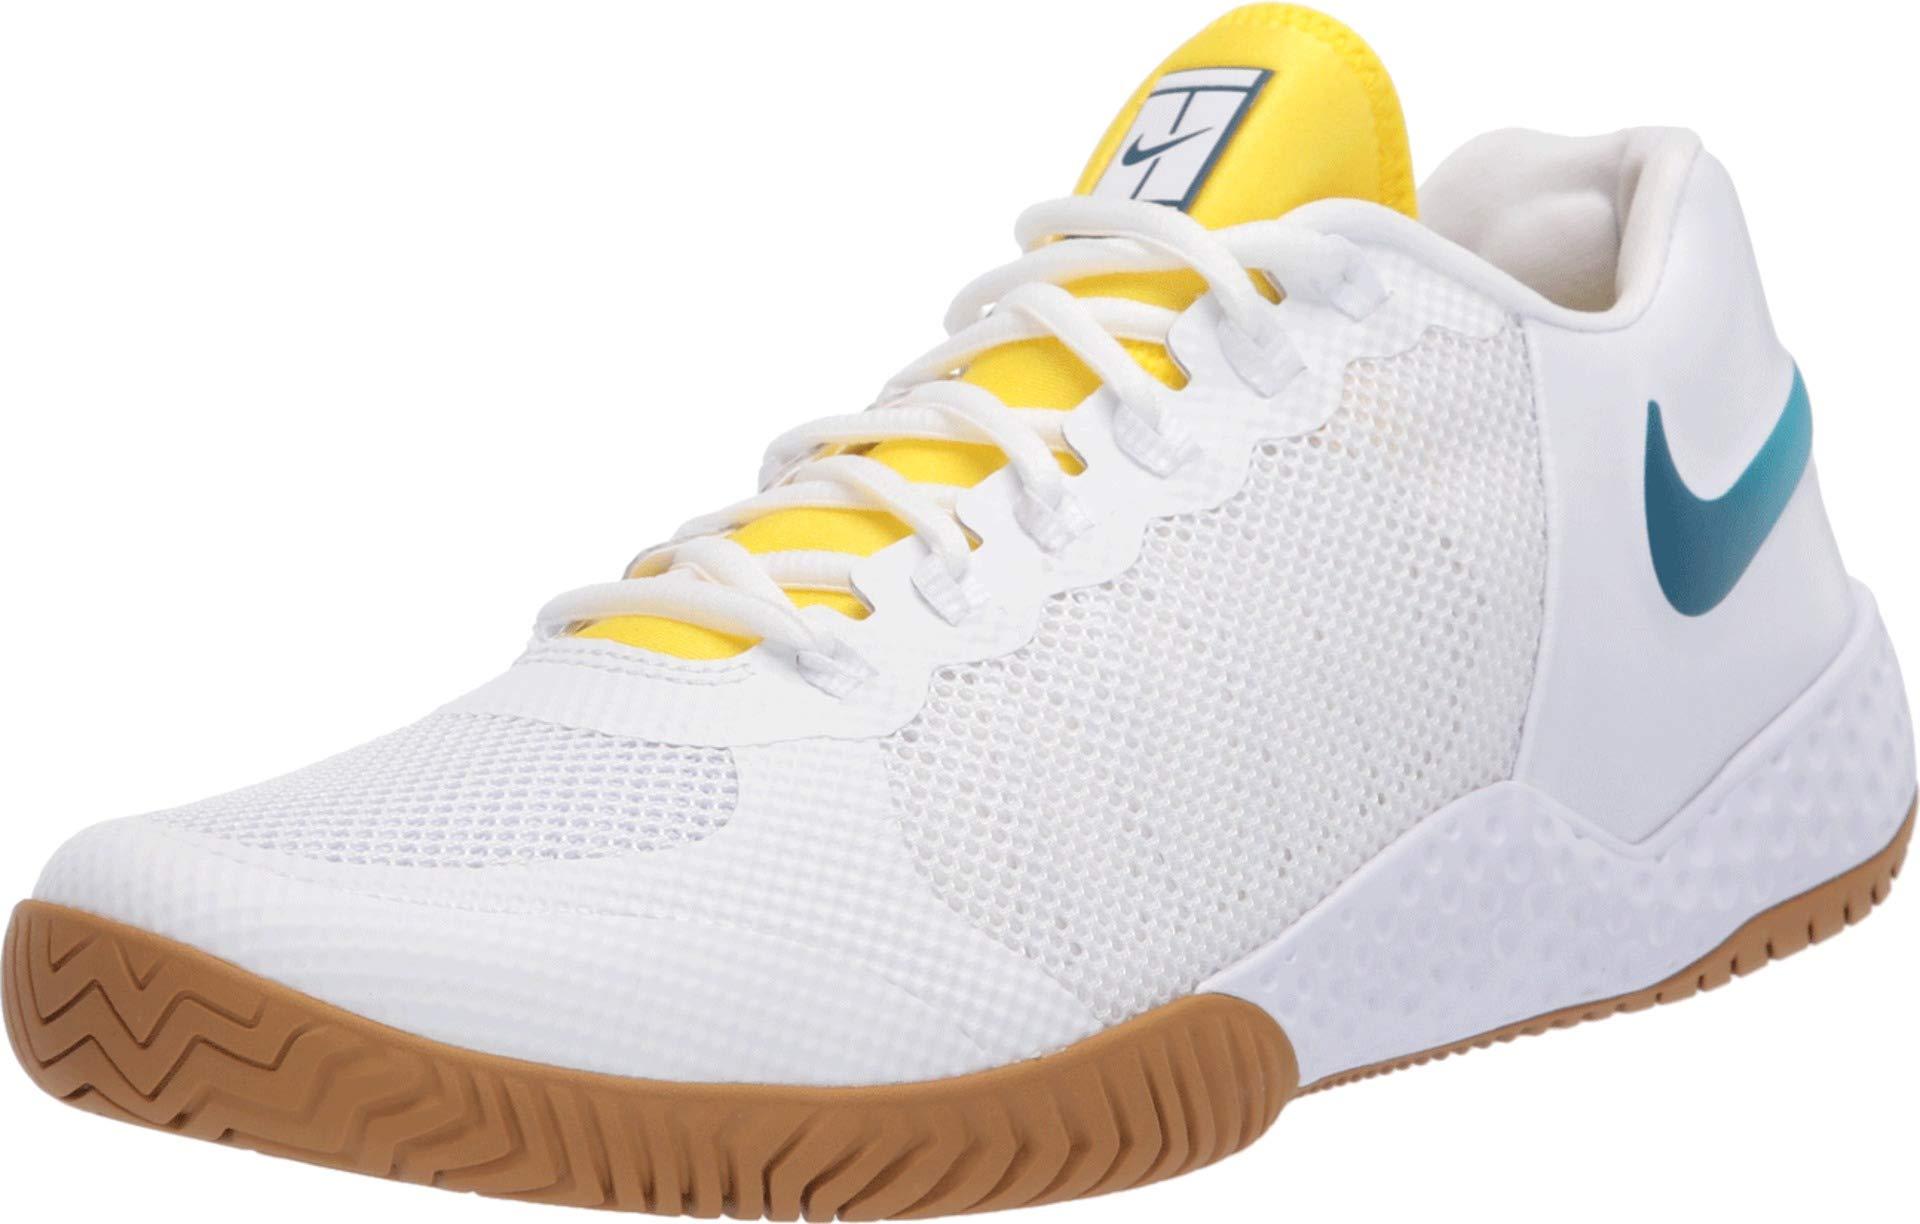 Nike Court Flare 2 Womens Hard Court Tennis Shoe in White | Lyst